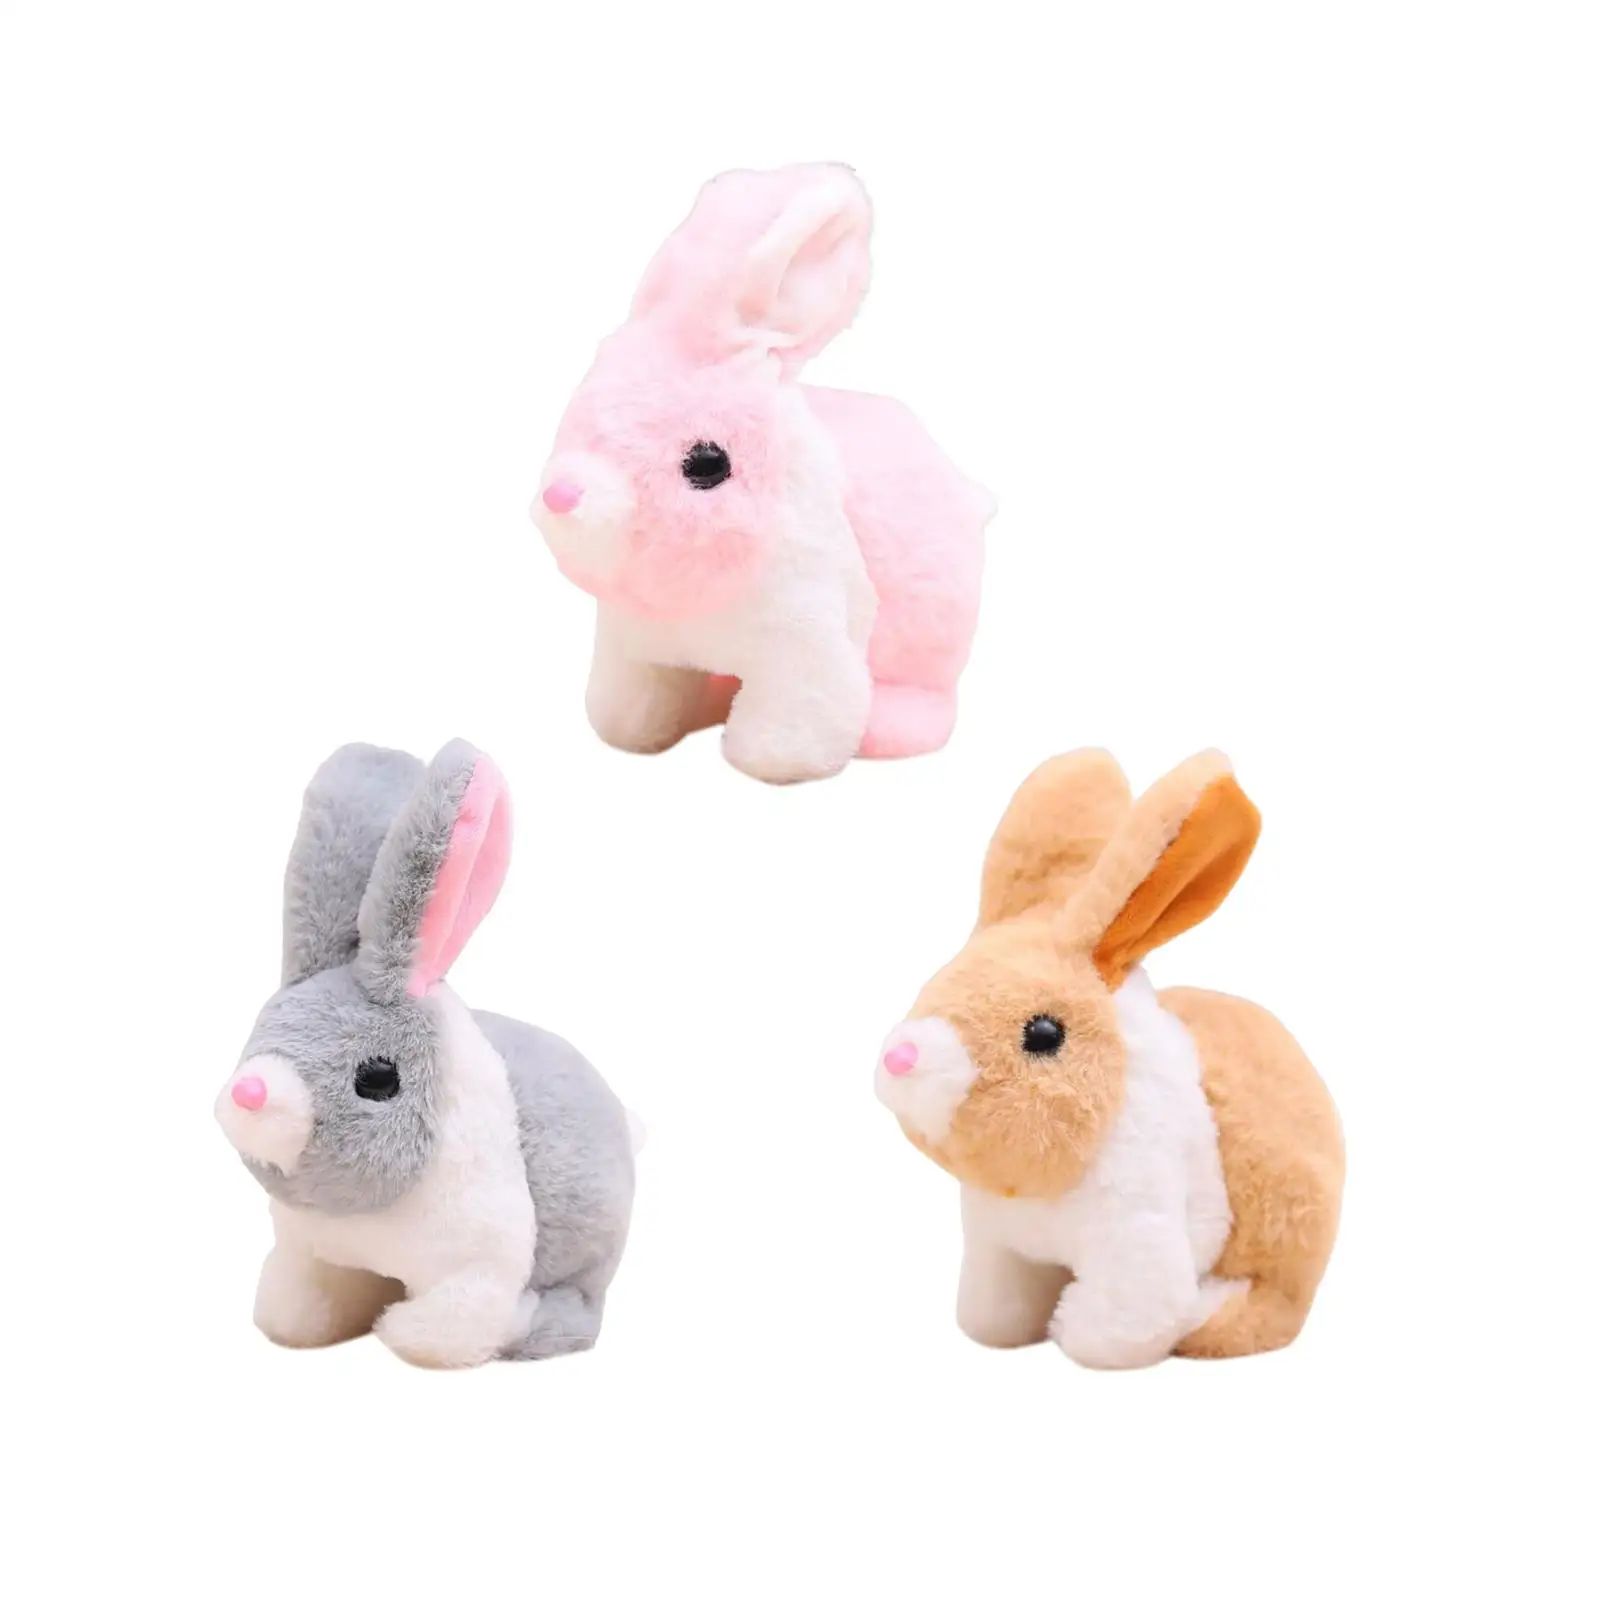 Electric Rabbit Toys Novelty Electronic Interactive Toy for Birthday Gift